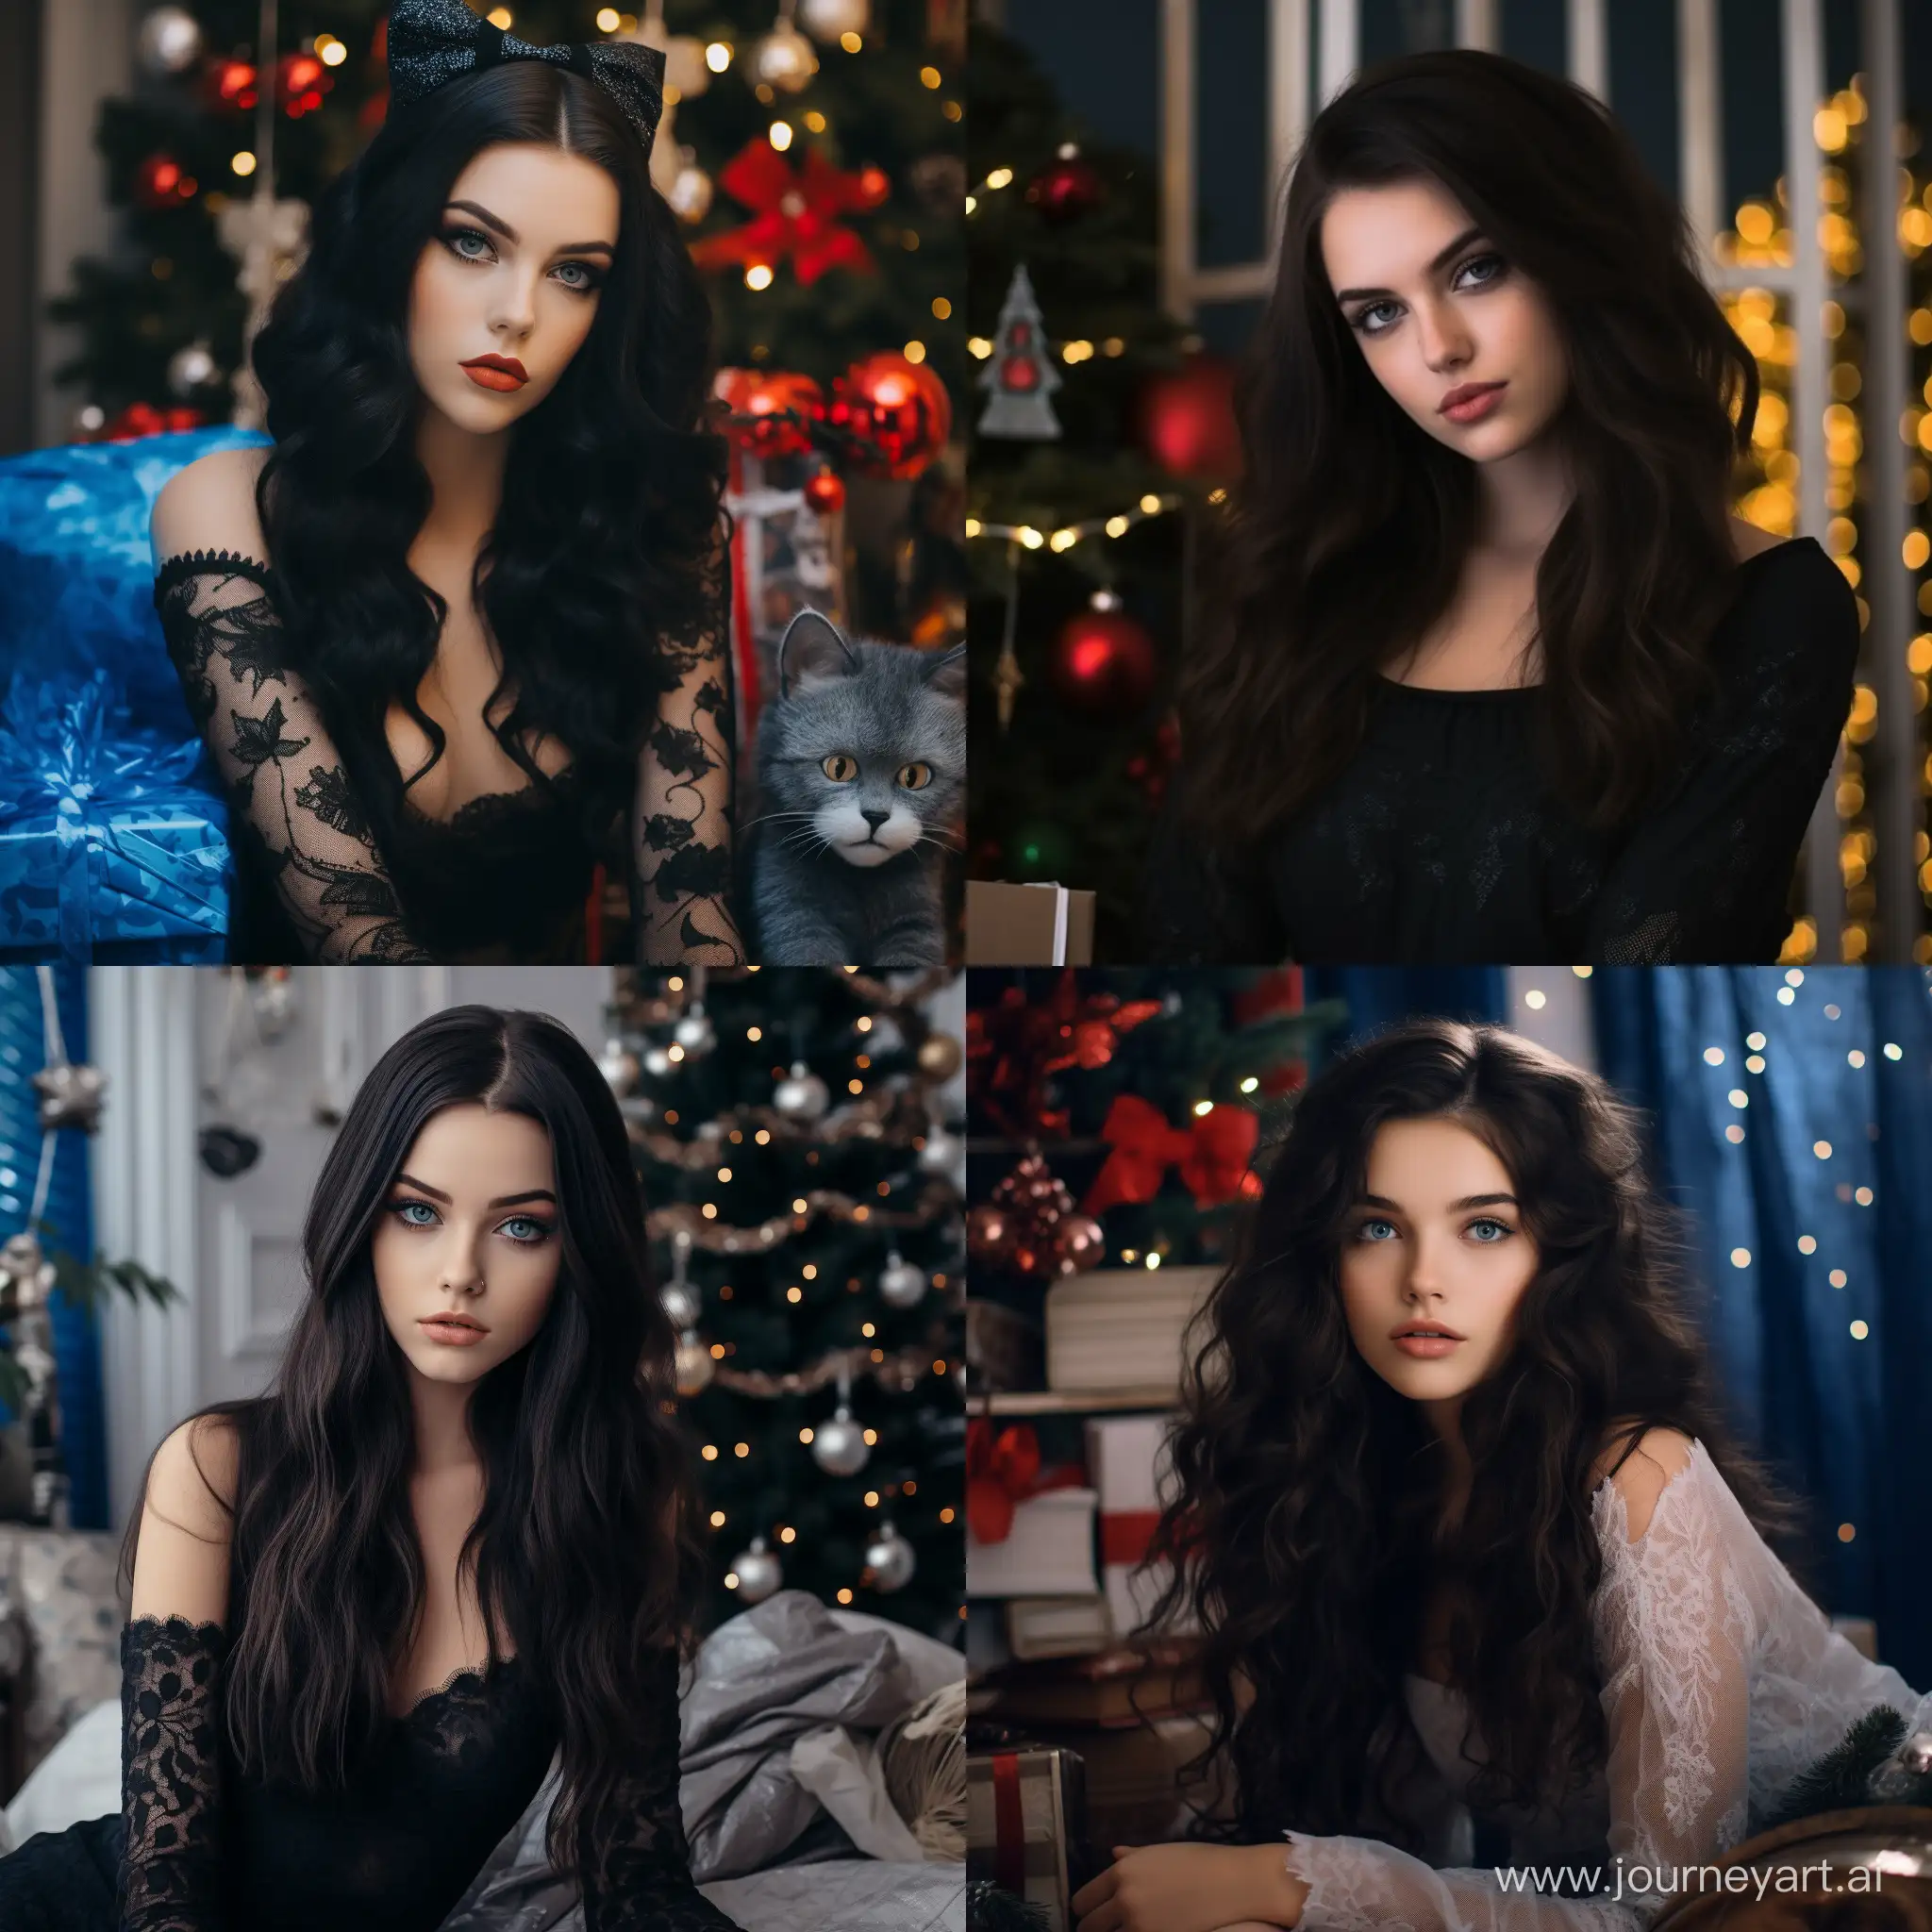 Festive-Home-Portrait-Adorable-Girl-with-Black-Hair-and-Blue-Eyes-Captures-Christmas-Charm